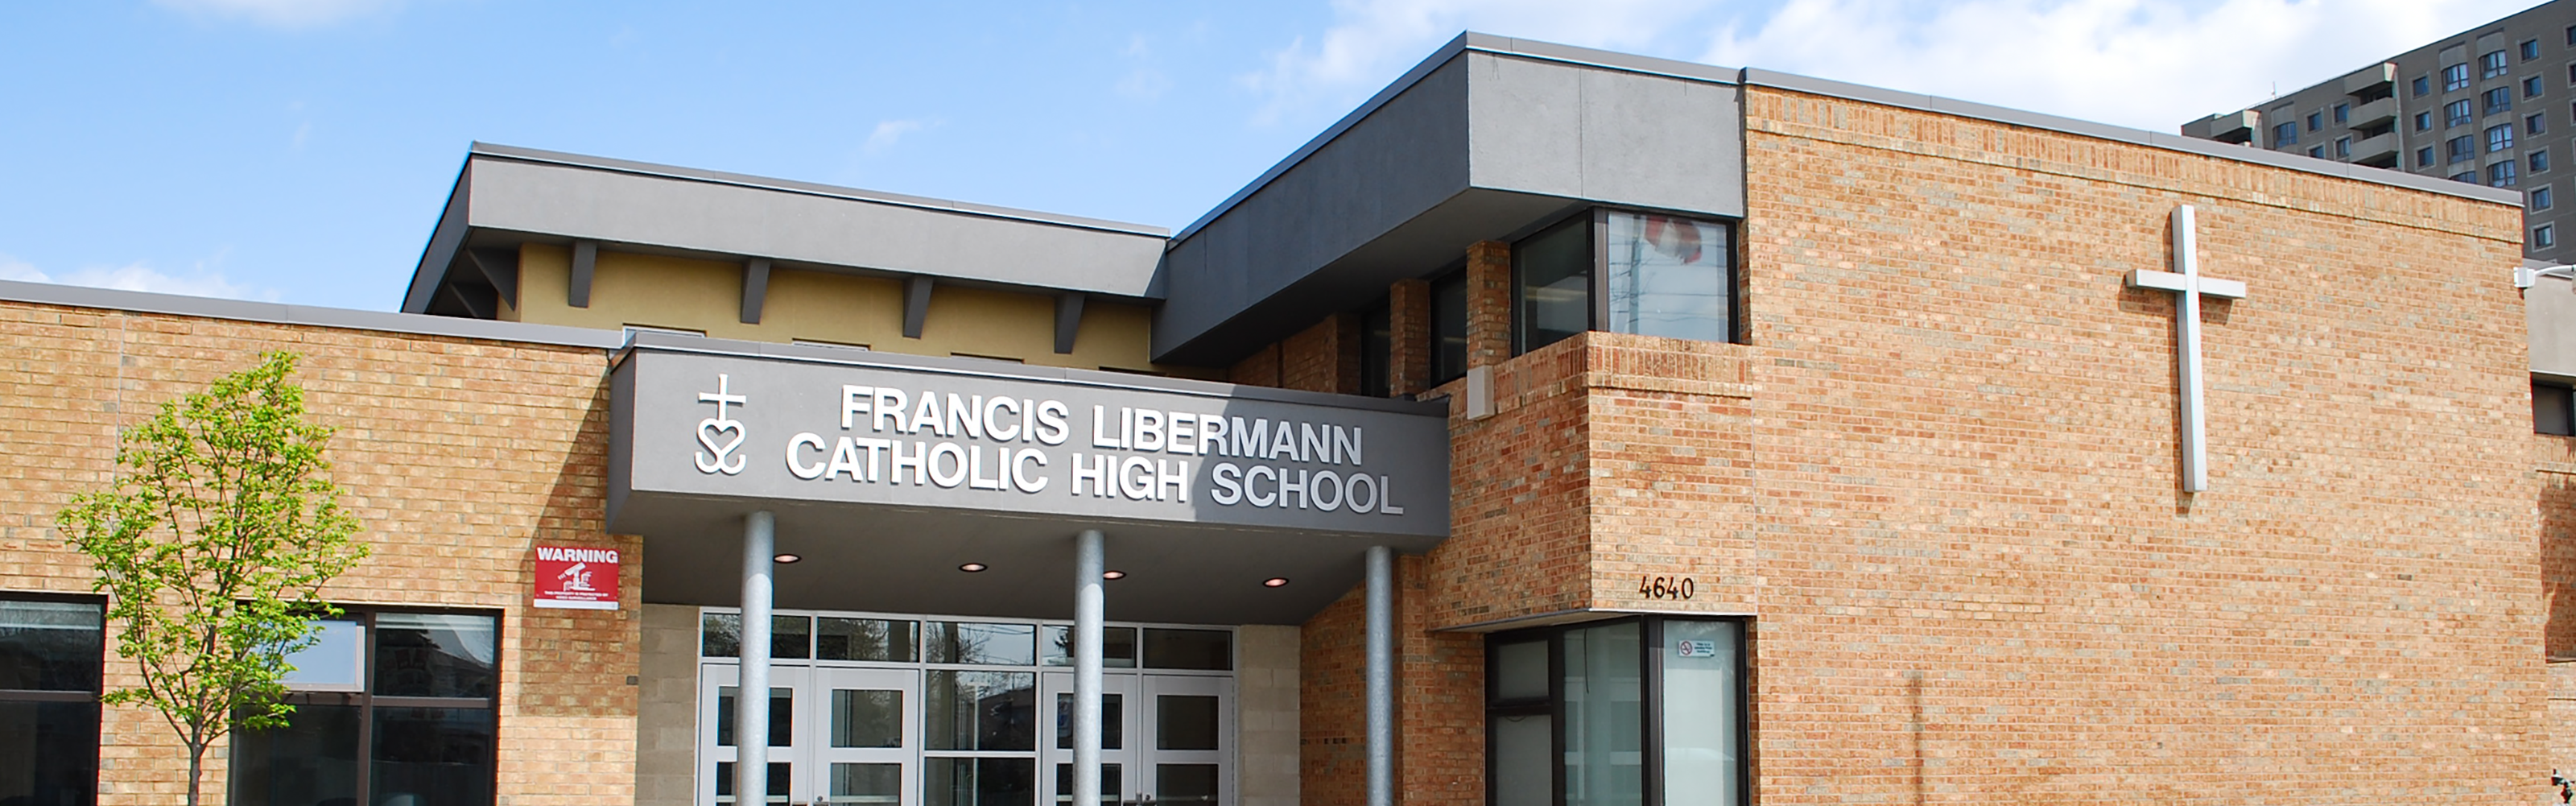 Front of the Francis Libermann Catholic High School building